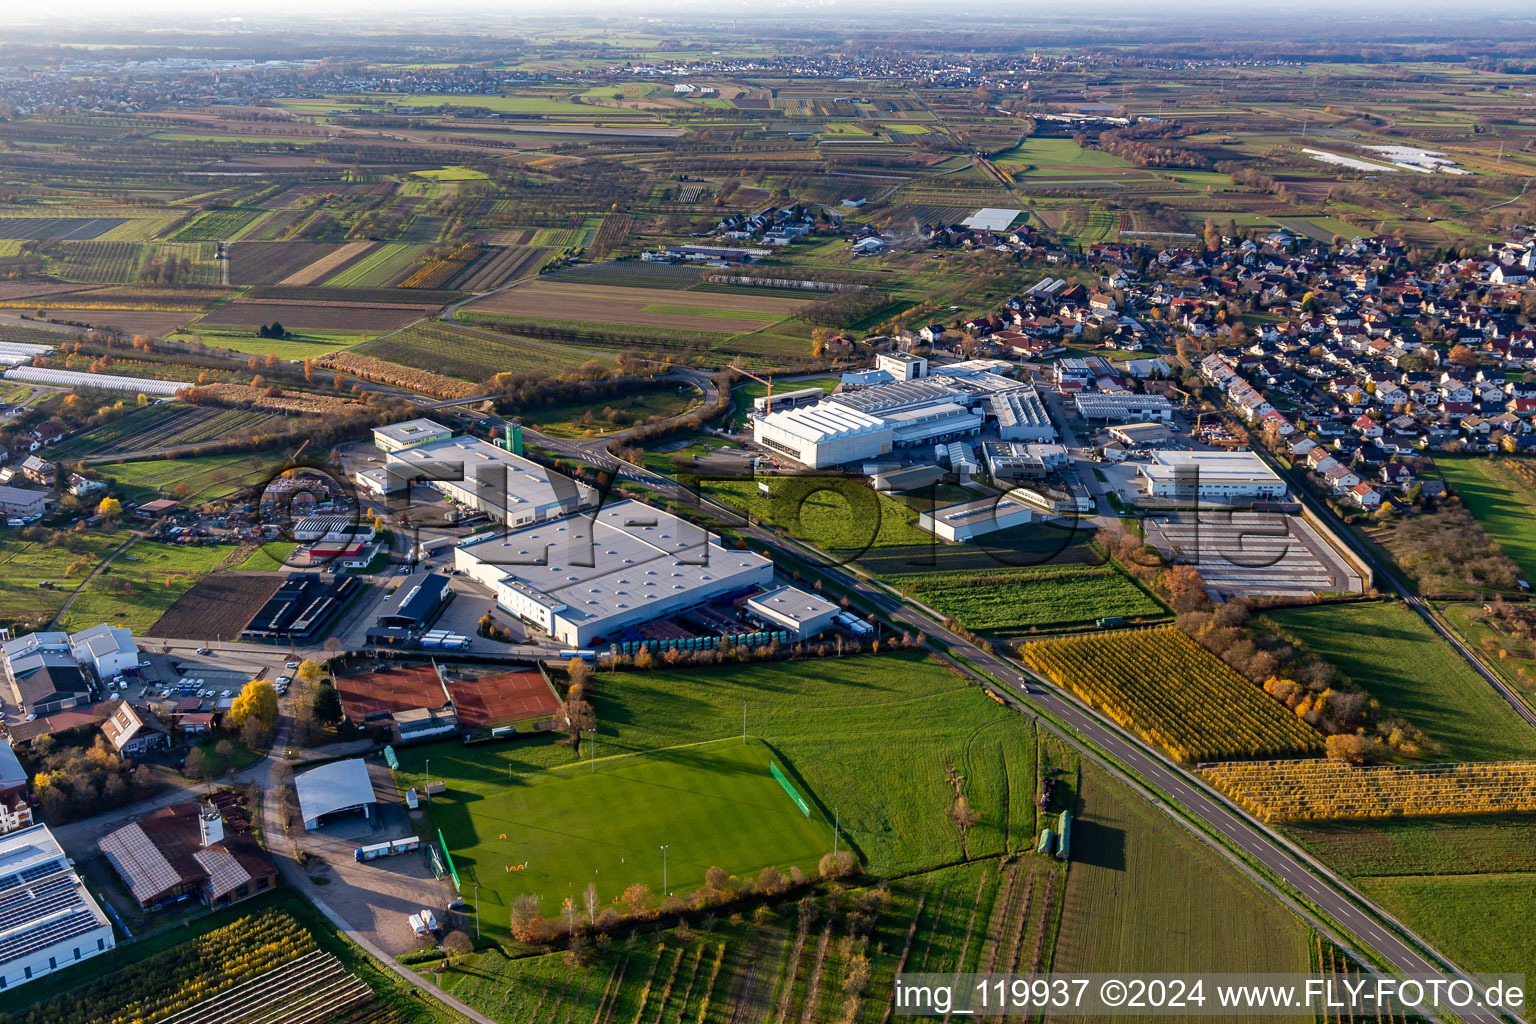 Company grounds and facilities of HELIA Ladenbau GmbH, Siebdruck Service Welle GmbH and Ernst Umformtechnik GmbH on B28 between Zusenhofen and Nussbach in the state Baden-Wurttemberg, Germany